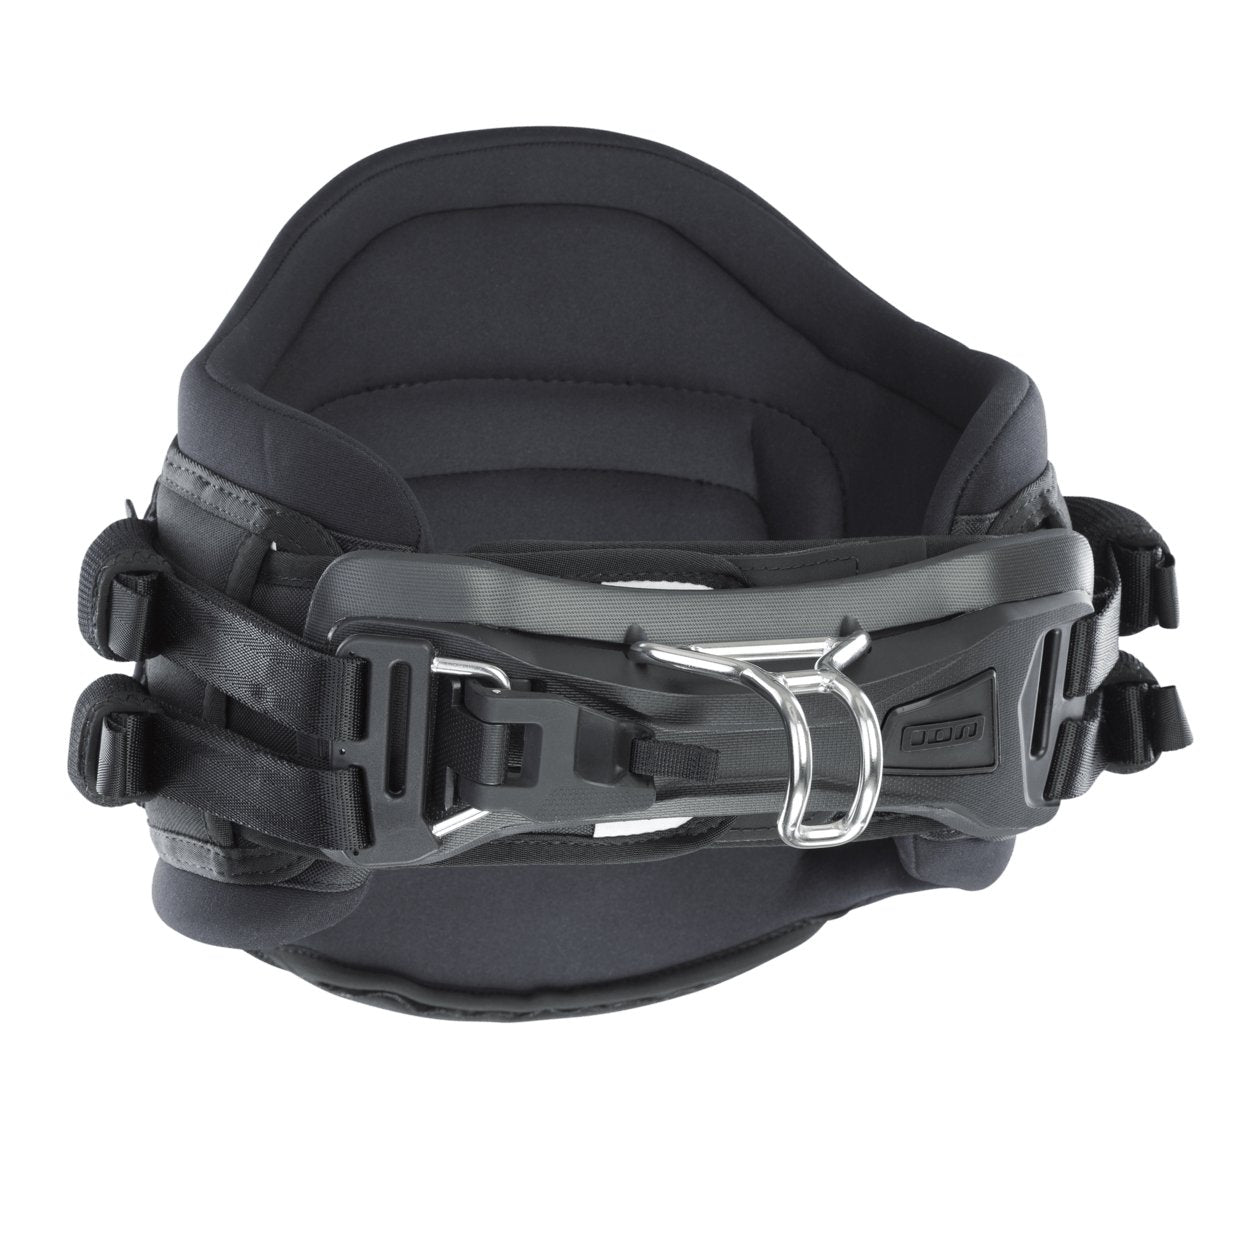 ION Axxis Windsurf Harness Men 2022 - Worthing Watersports - 9008415944361 - Harness - ION Water